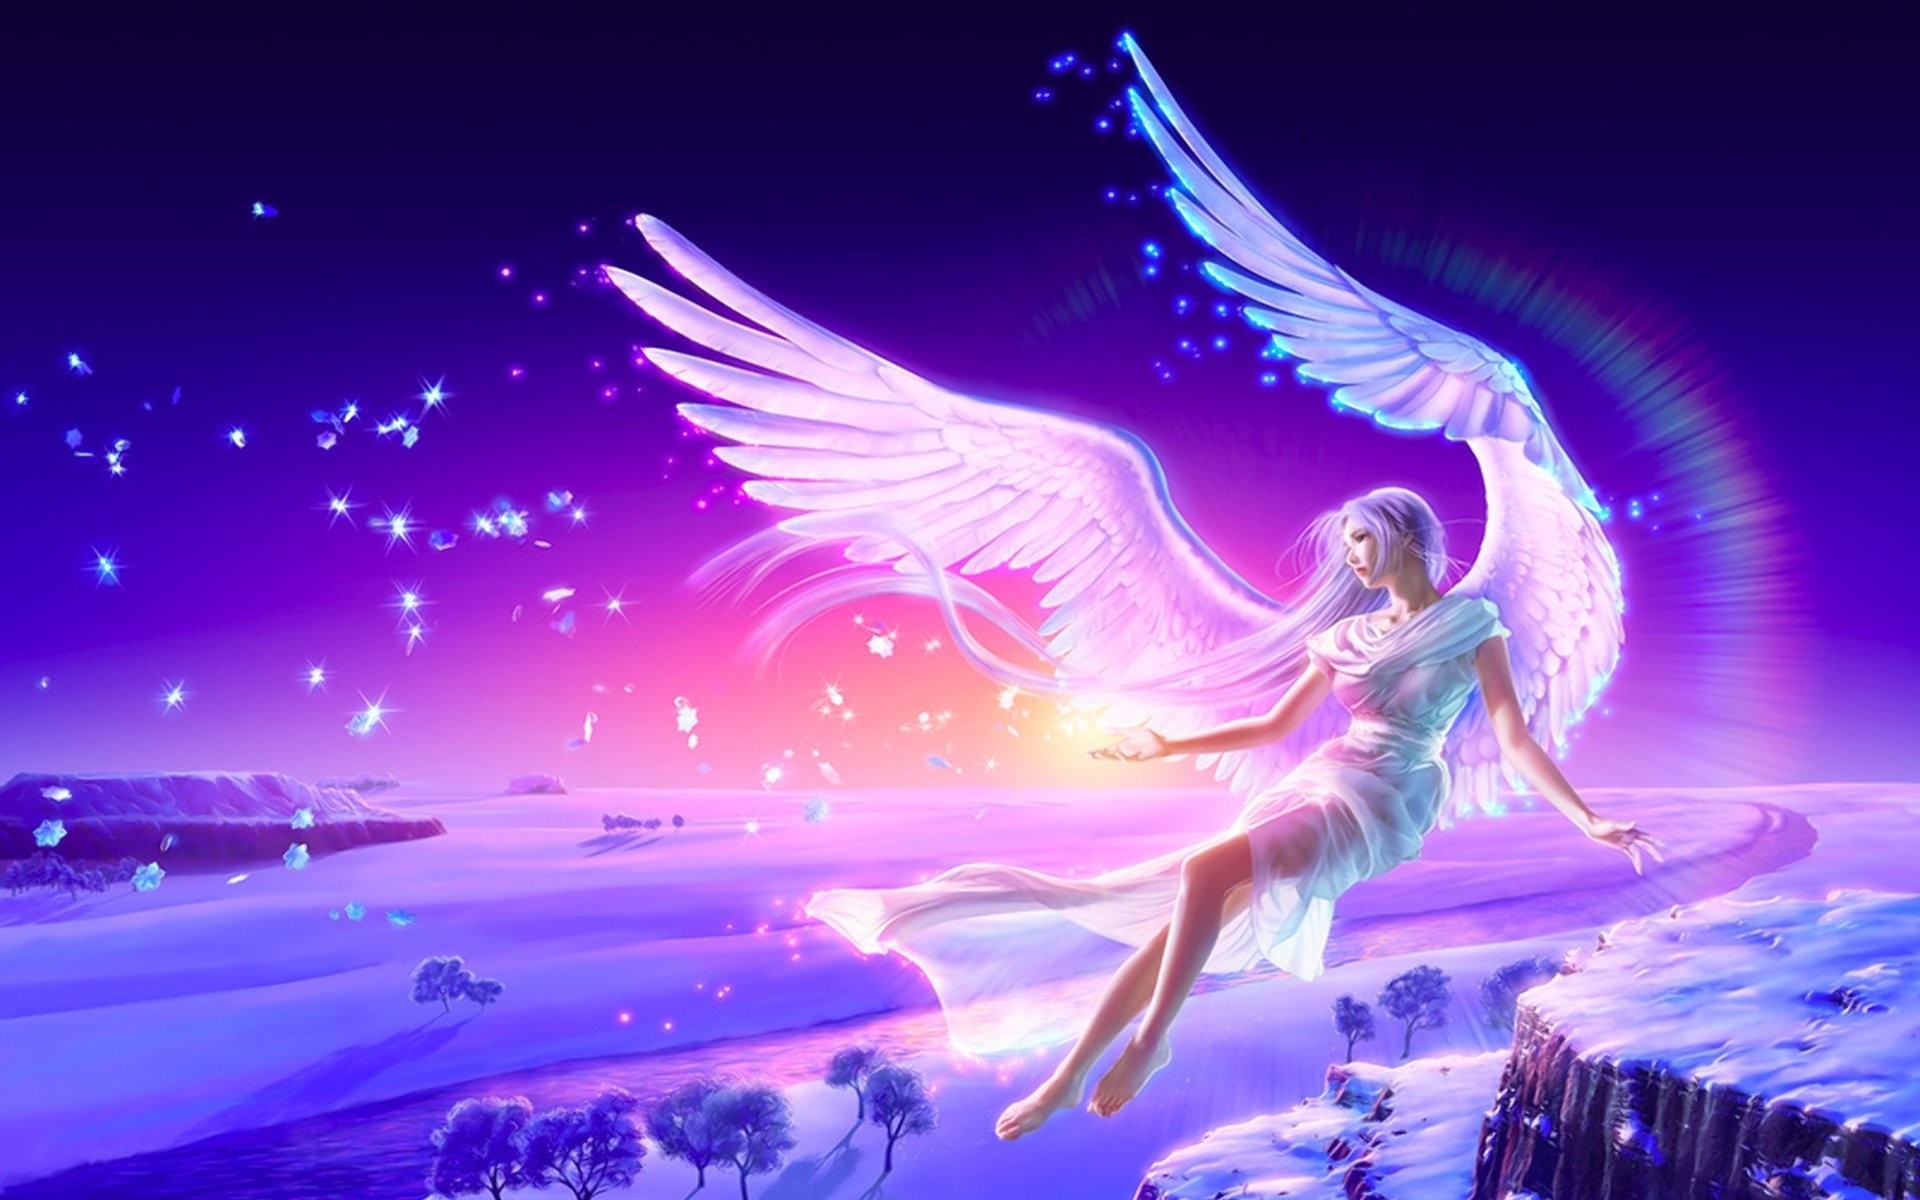 1920x1200 Explore Angel Wallpaper, Wallpaper Backgrounds, and more!